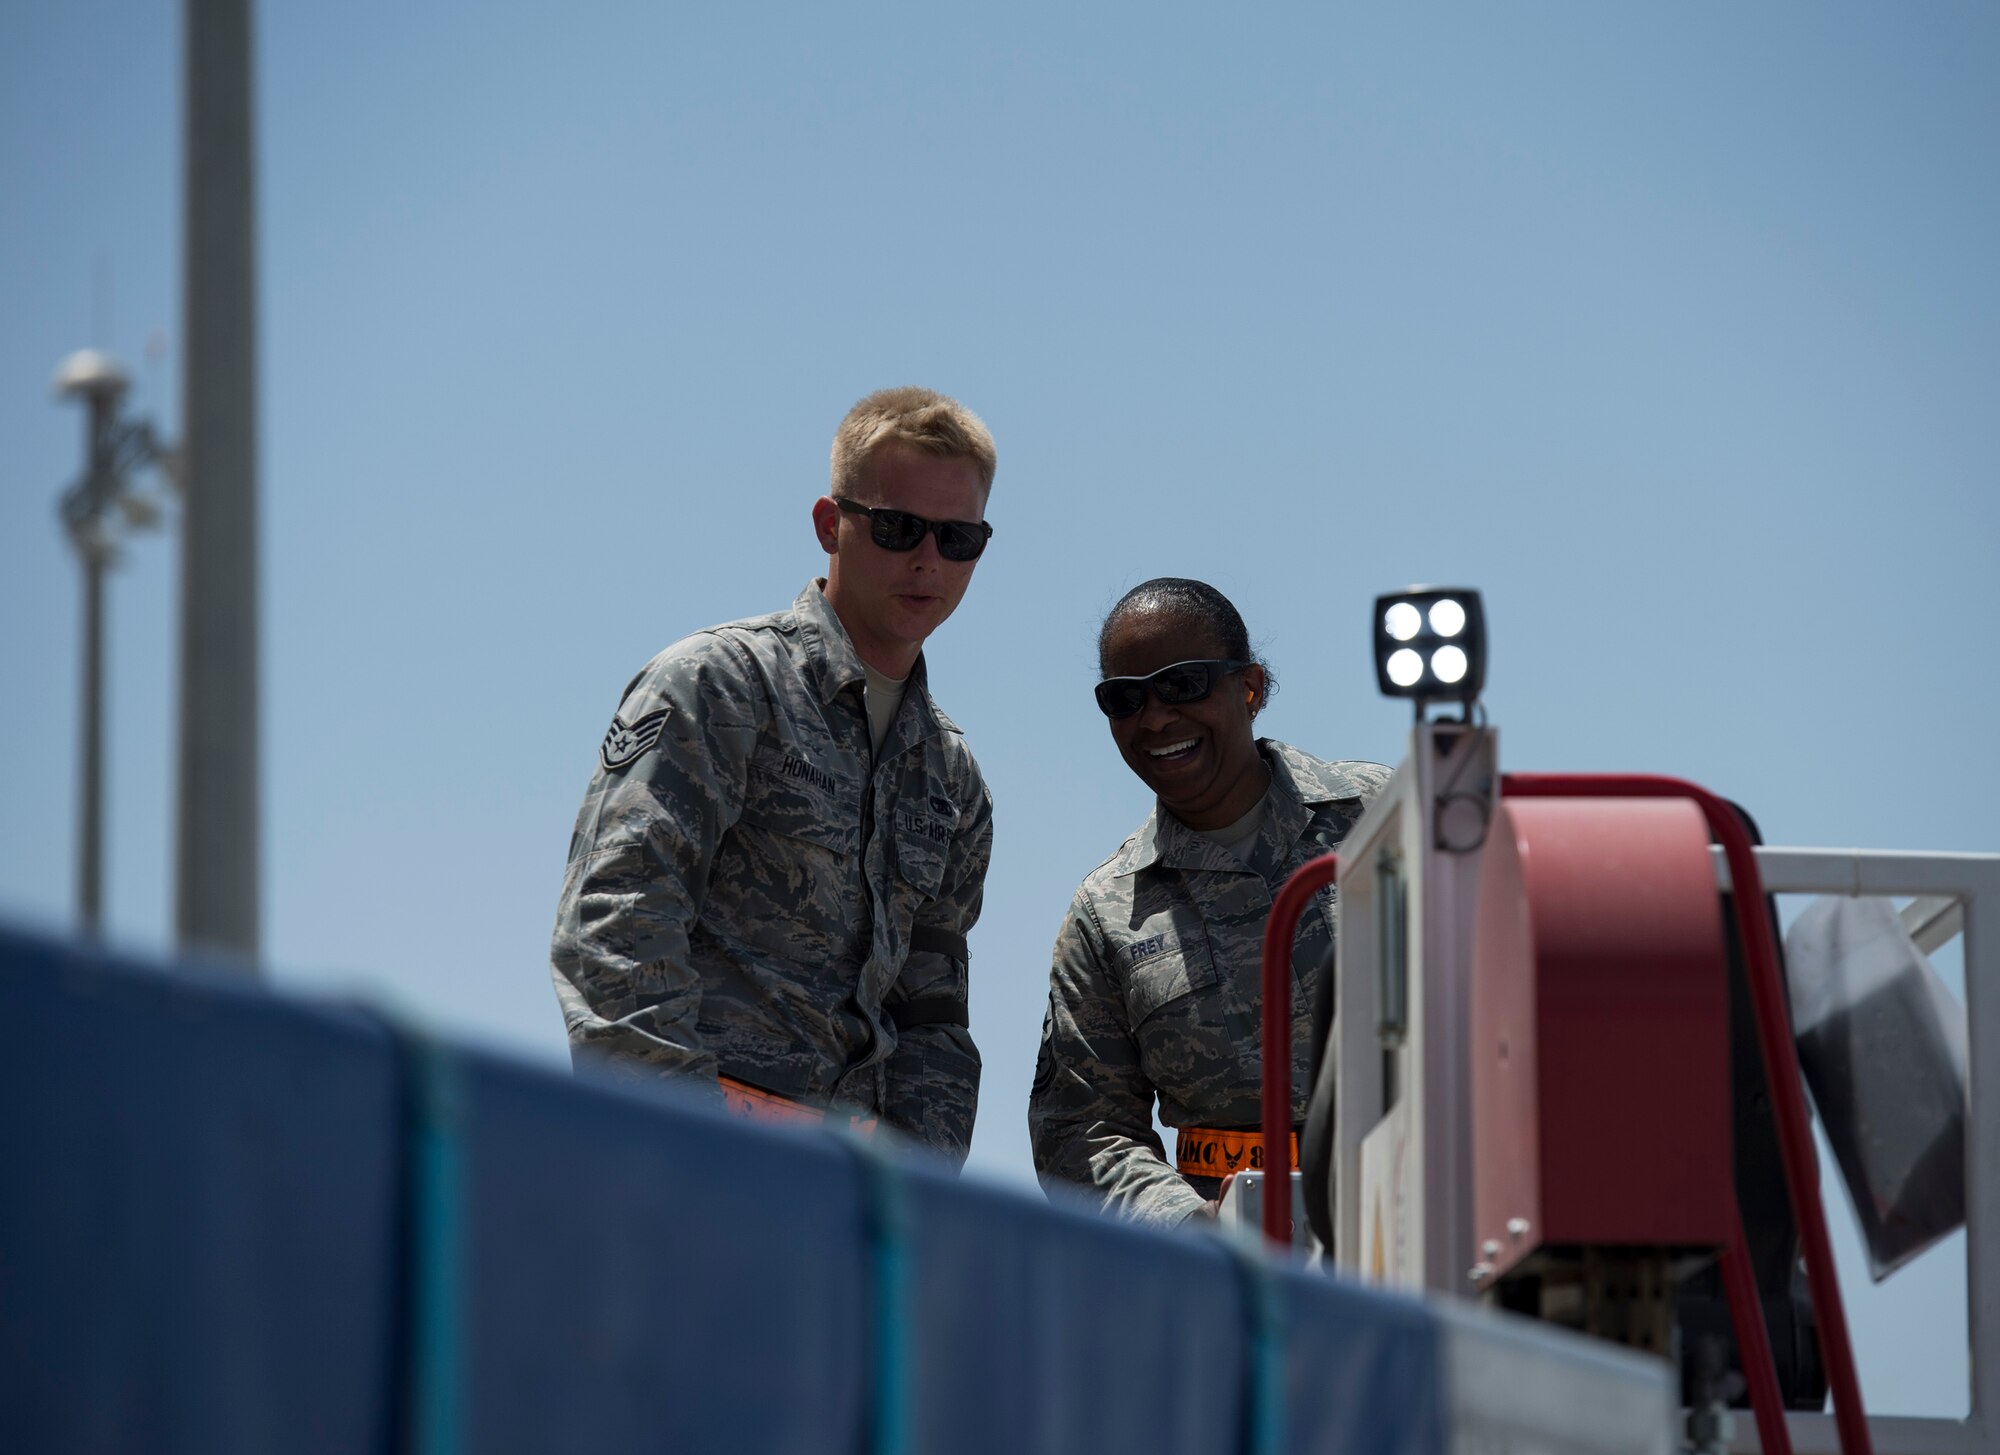 U.S. Air Force Chief Master Sgt. Shelina Frey, Command Chief Master Sergeant for Air Mobility Command, right, operates a lower lobe loader with the help of Staff Sgt. Alexander Honahan with the 8th Expeditionary Air Mobility Squadron at Al Udeid Air Base, Qatar, May 6, 2017. Frey was accompanied by Chief Master Sgt. Mark Redden, Command Chief with the 521st Air Mobility Operations Wing and made several stops throughout the 8th Expeditionary Air Mobility Squadron sections, providing an opportunity for Airmen to speak about their duties and ask questions.  (U.S. Air Force photo by Tech. Sgt. Amy M. Lovgren)